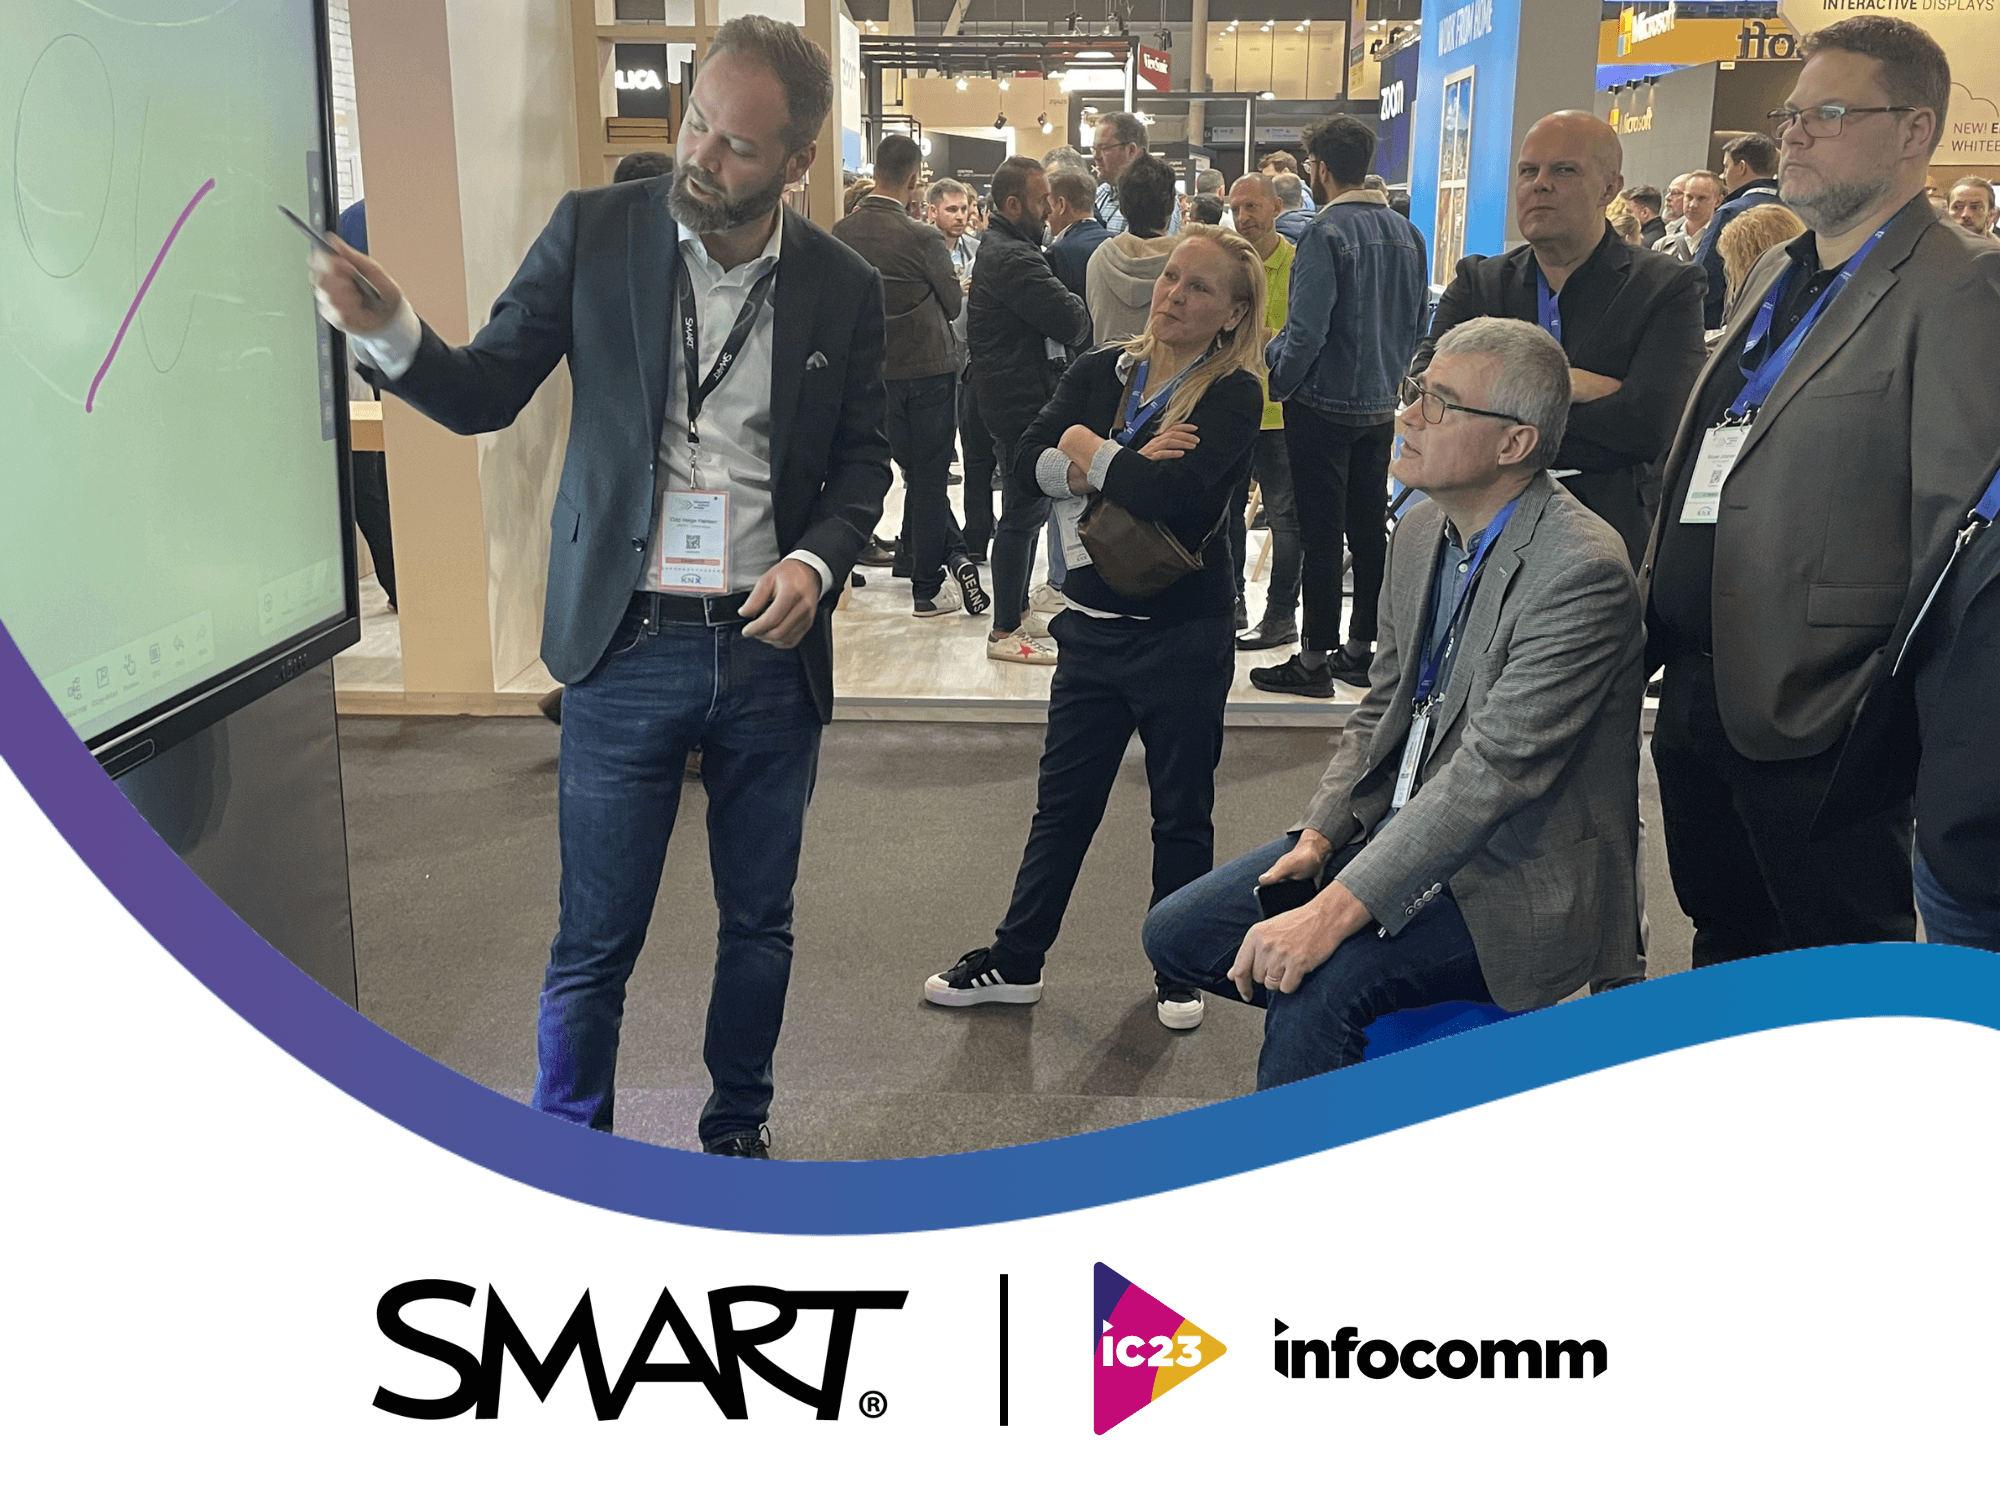 SMART team demonstrating the SMART interactive display to a business professional at InfoComm 2023, with SMART and Infocomm logos displayed at the bottom of the image.